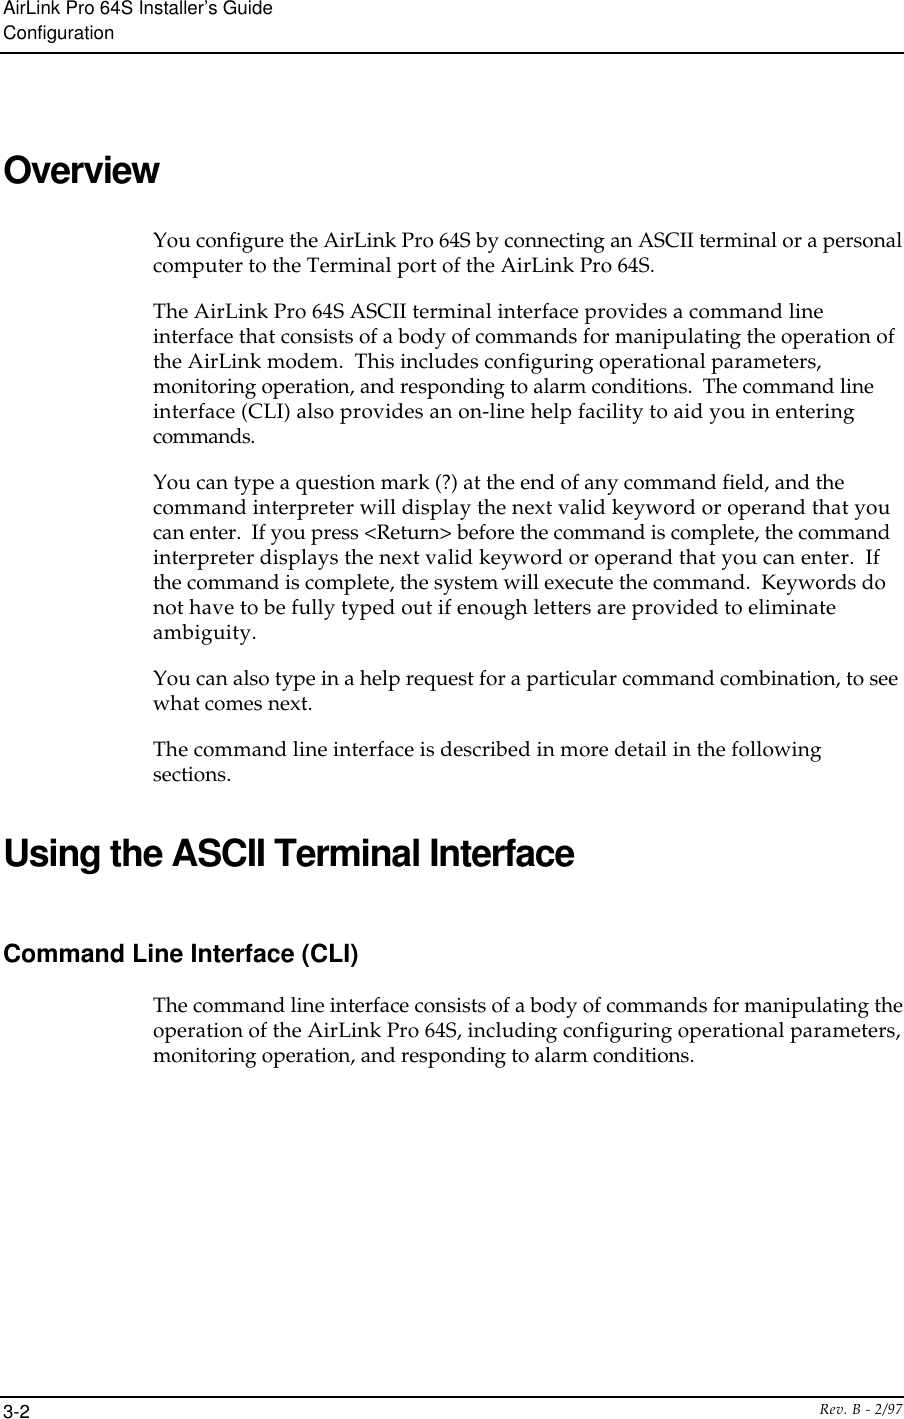 AirLink Pro 64S Installer’s GuideConfigurationRev. B - 2/973-2OverviewYou configure the AirLink Pro 64S by connecting an ASCII terminal or a personalcomputer to the Terminal port of the AirLink Pro 64S.The AirLink Pro 64S ASCII terminal interface provides a command lineinterface that consists of a body of commands for manipulating the operation ofthe AirLink modem.  This includes configuring operational parameters,monitoring operation, and responding to alarm conditions.  The command lineinterface (CLI) also provides an on-line help facility to aid you in enteringcommands.You can type a question mark (?) at the end of any command field, and thecommand interpreter will display the next valid keyword or operand that youcan enter.  If you press &lt;Return&gt; before the command is complete, the commandinterpreter displays the next valid keyword or operand that you can enter.  Ifthe command is complete, the system will execute the command.  Keywords donot have to be fully typed out if enough letters are provided to eliminateambiguity.You can also type in a help request for a particular command combination, to seewhat comes next.The command line interface is described in more detail in the followingsections.Using the ASCII Terminal InterfaceCommand Line Interface (CLI)The command line interface consists of a body of commands for manipulating theoperation of the AirLink Pro 64S, including configuring operational parameters,monitoring operation, and responding to alarm conditions.